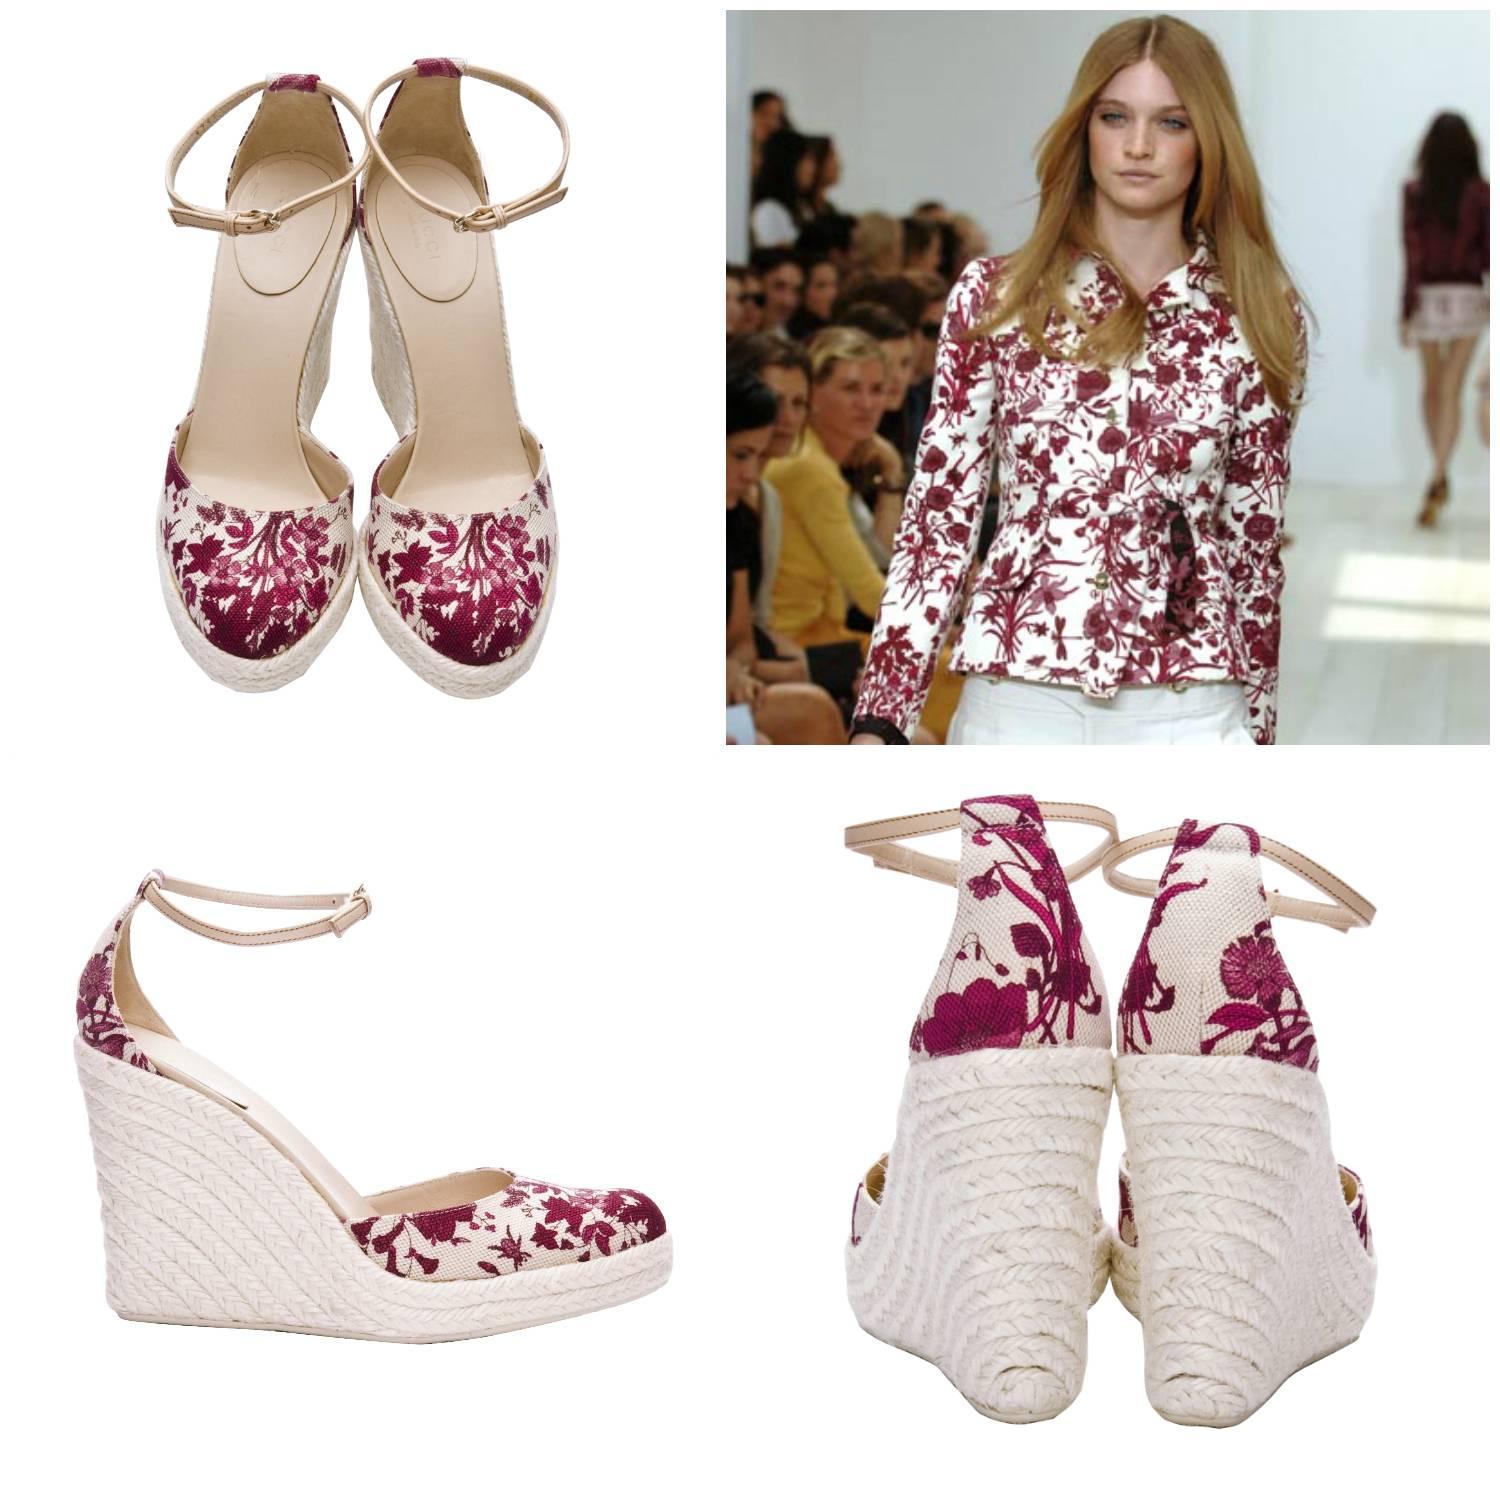 Gucci Cruise 2007 Wedges
Brand New
Size: 8
* Stunning Gucci Flora Wedges
* Runway Cruise 2007 Line
* Famous Flora Canvas Print
* Red Wine & Cream
*Woven Platform Heel
* Leather Adjustable Ankle Strap
* 1